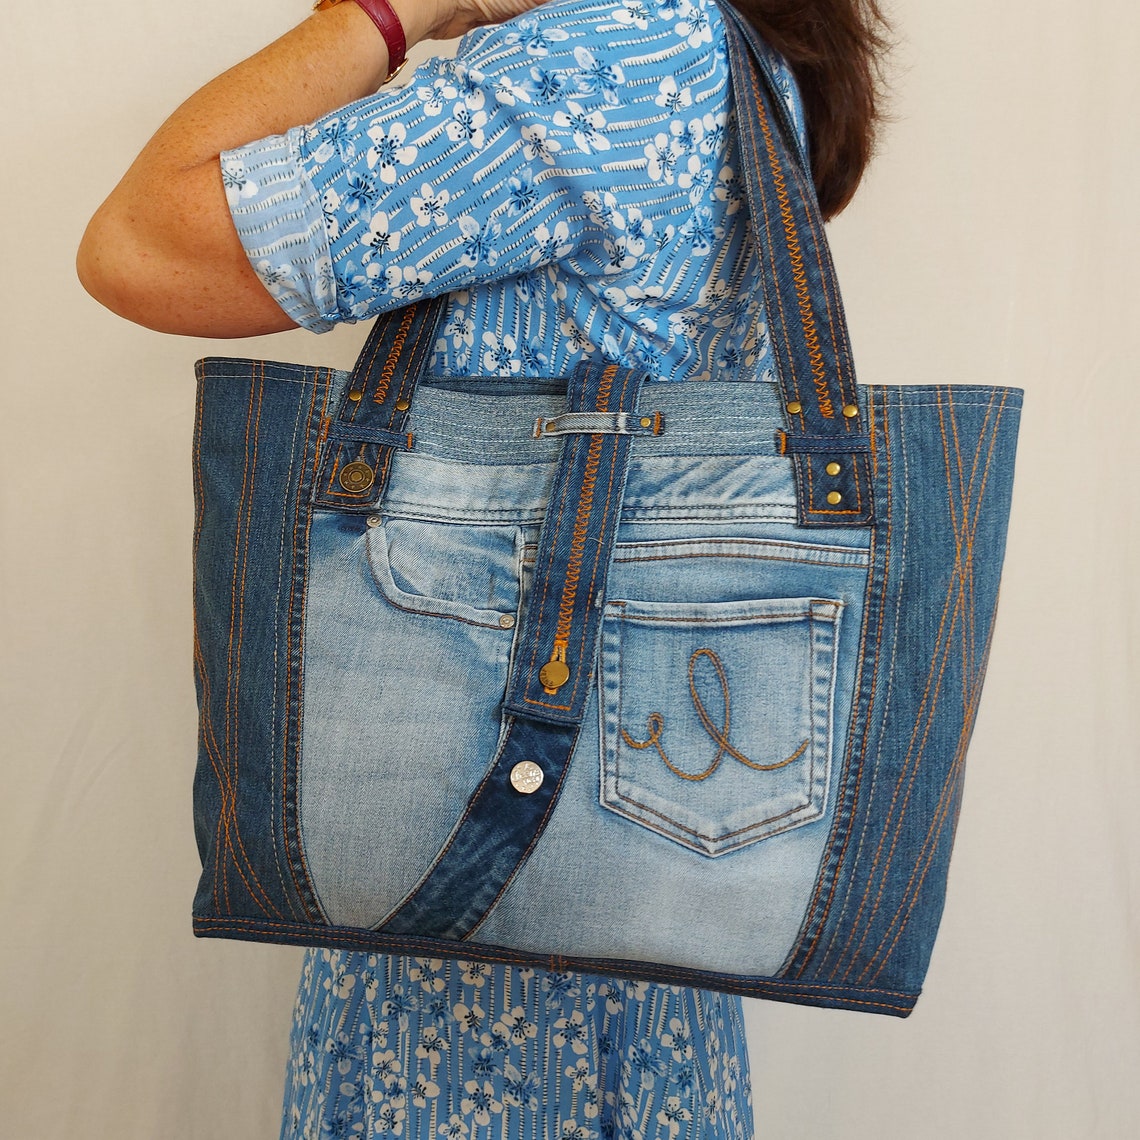 Hand Crafted Large Denim Tote Bag Made of Pre-loved Jeans - Etsy